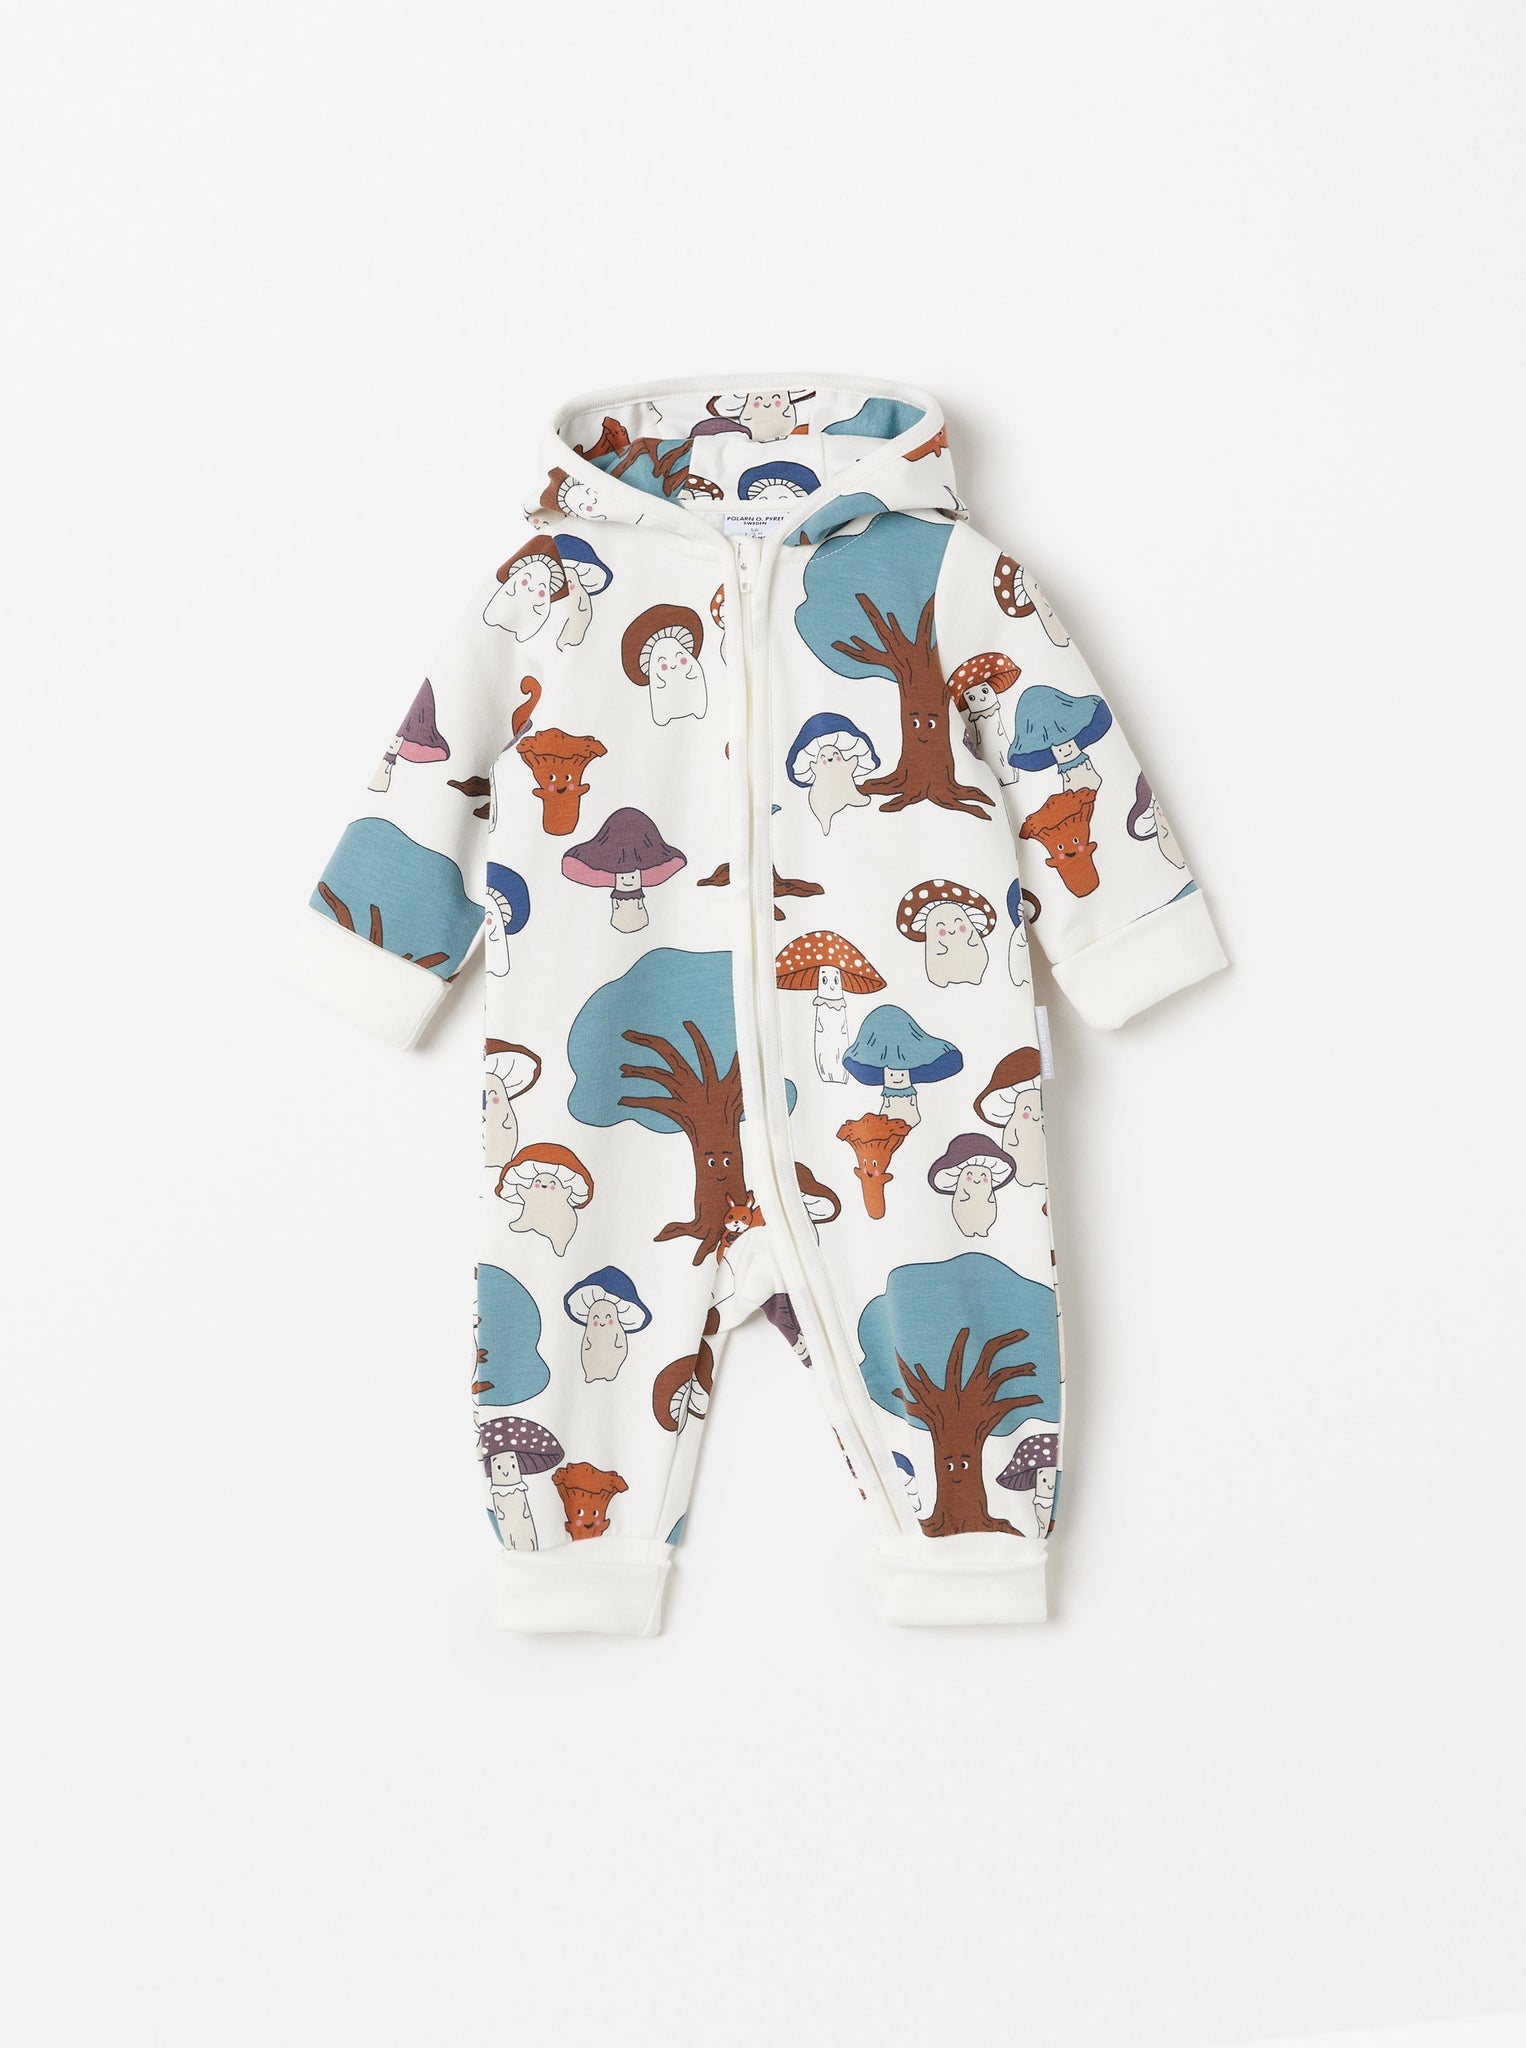 Organic Cotton White Baby All-In-One from the Polarn O. Pyret babywear collection. Clothes made using sustainably sourced materials.